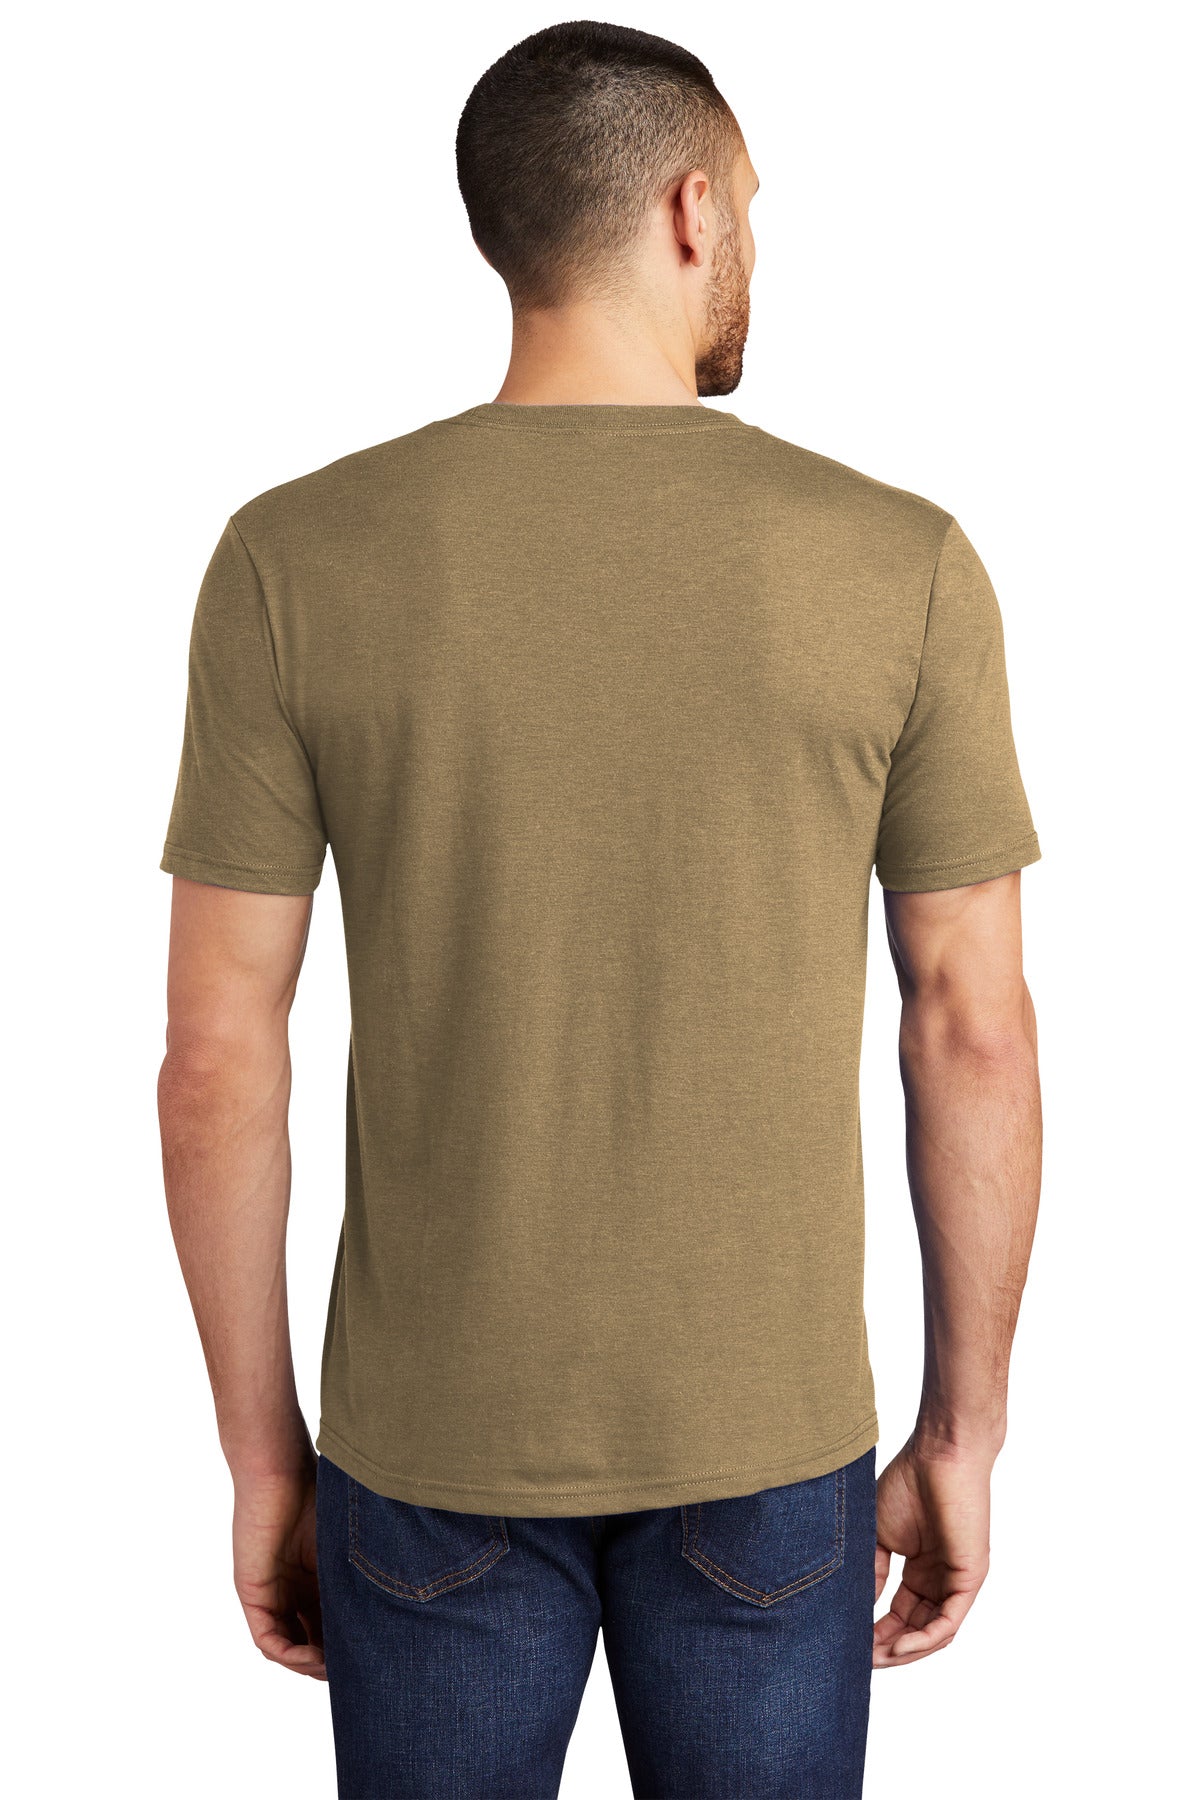 District ® Perfect Tri®Tee. DM130 [Coyote Brown Heather] - DFW Impression